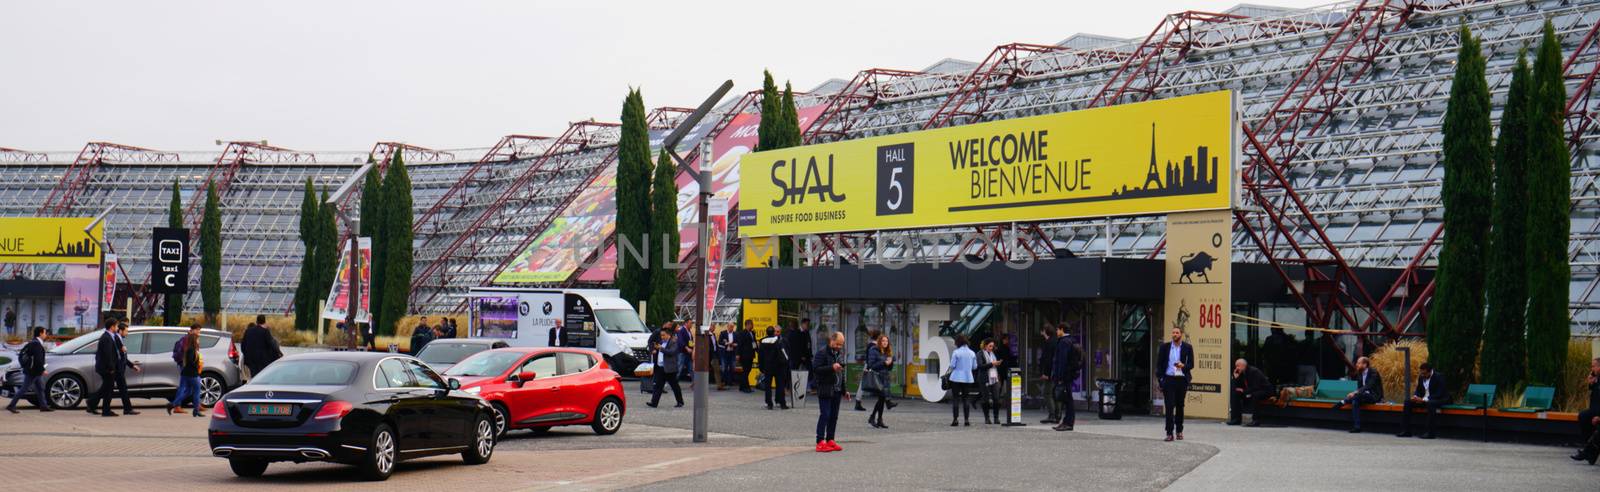 Paris/France - October 24 2018: SIAL trade fair specialized at food industry